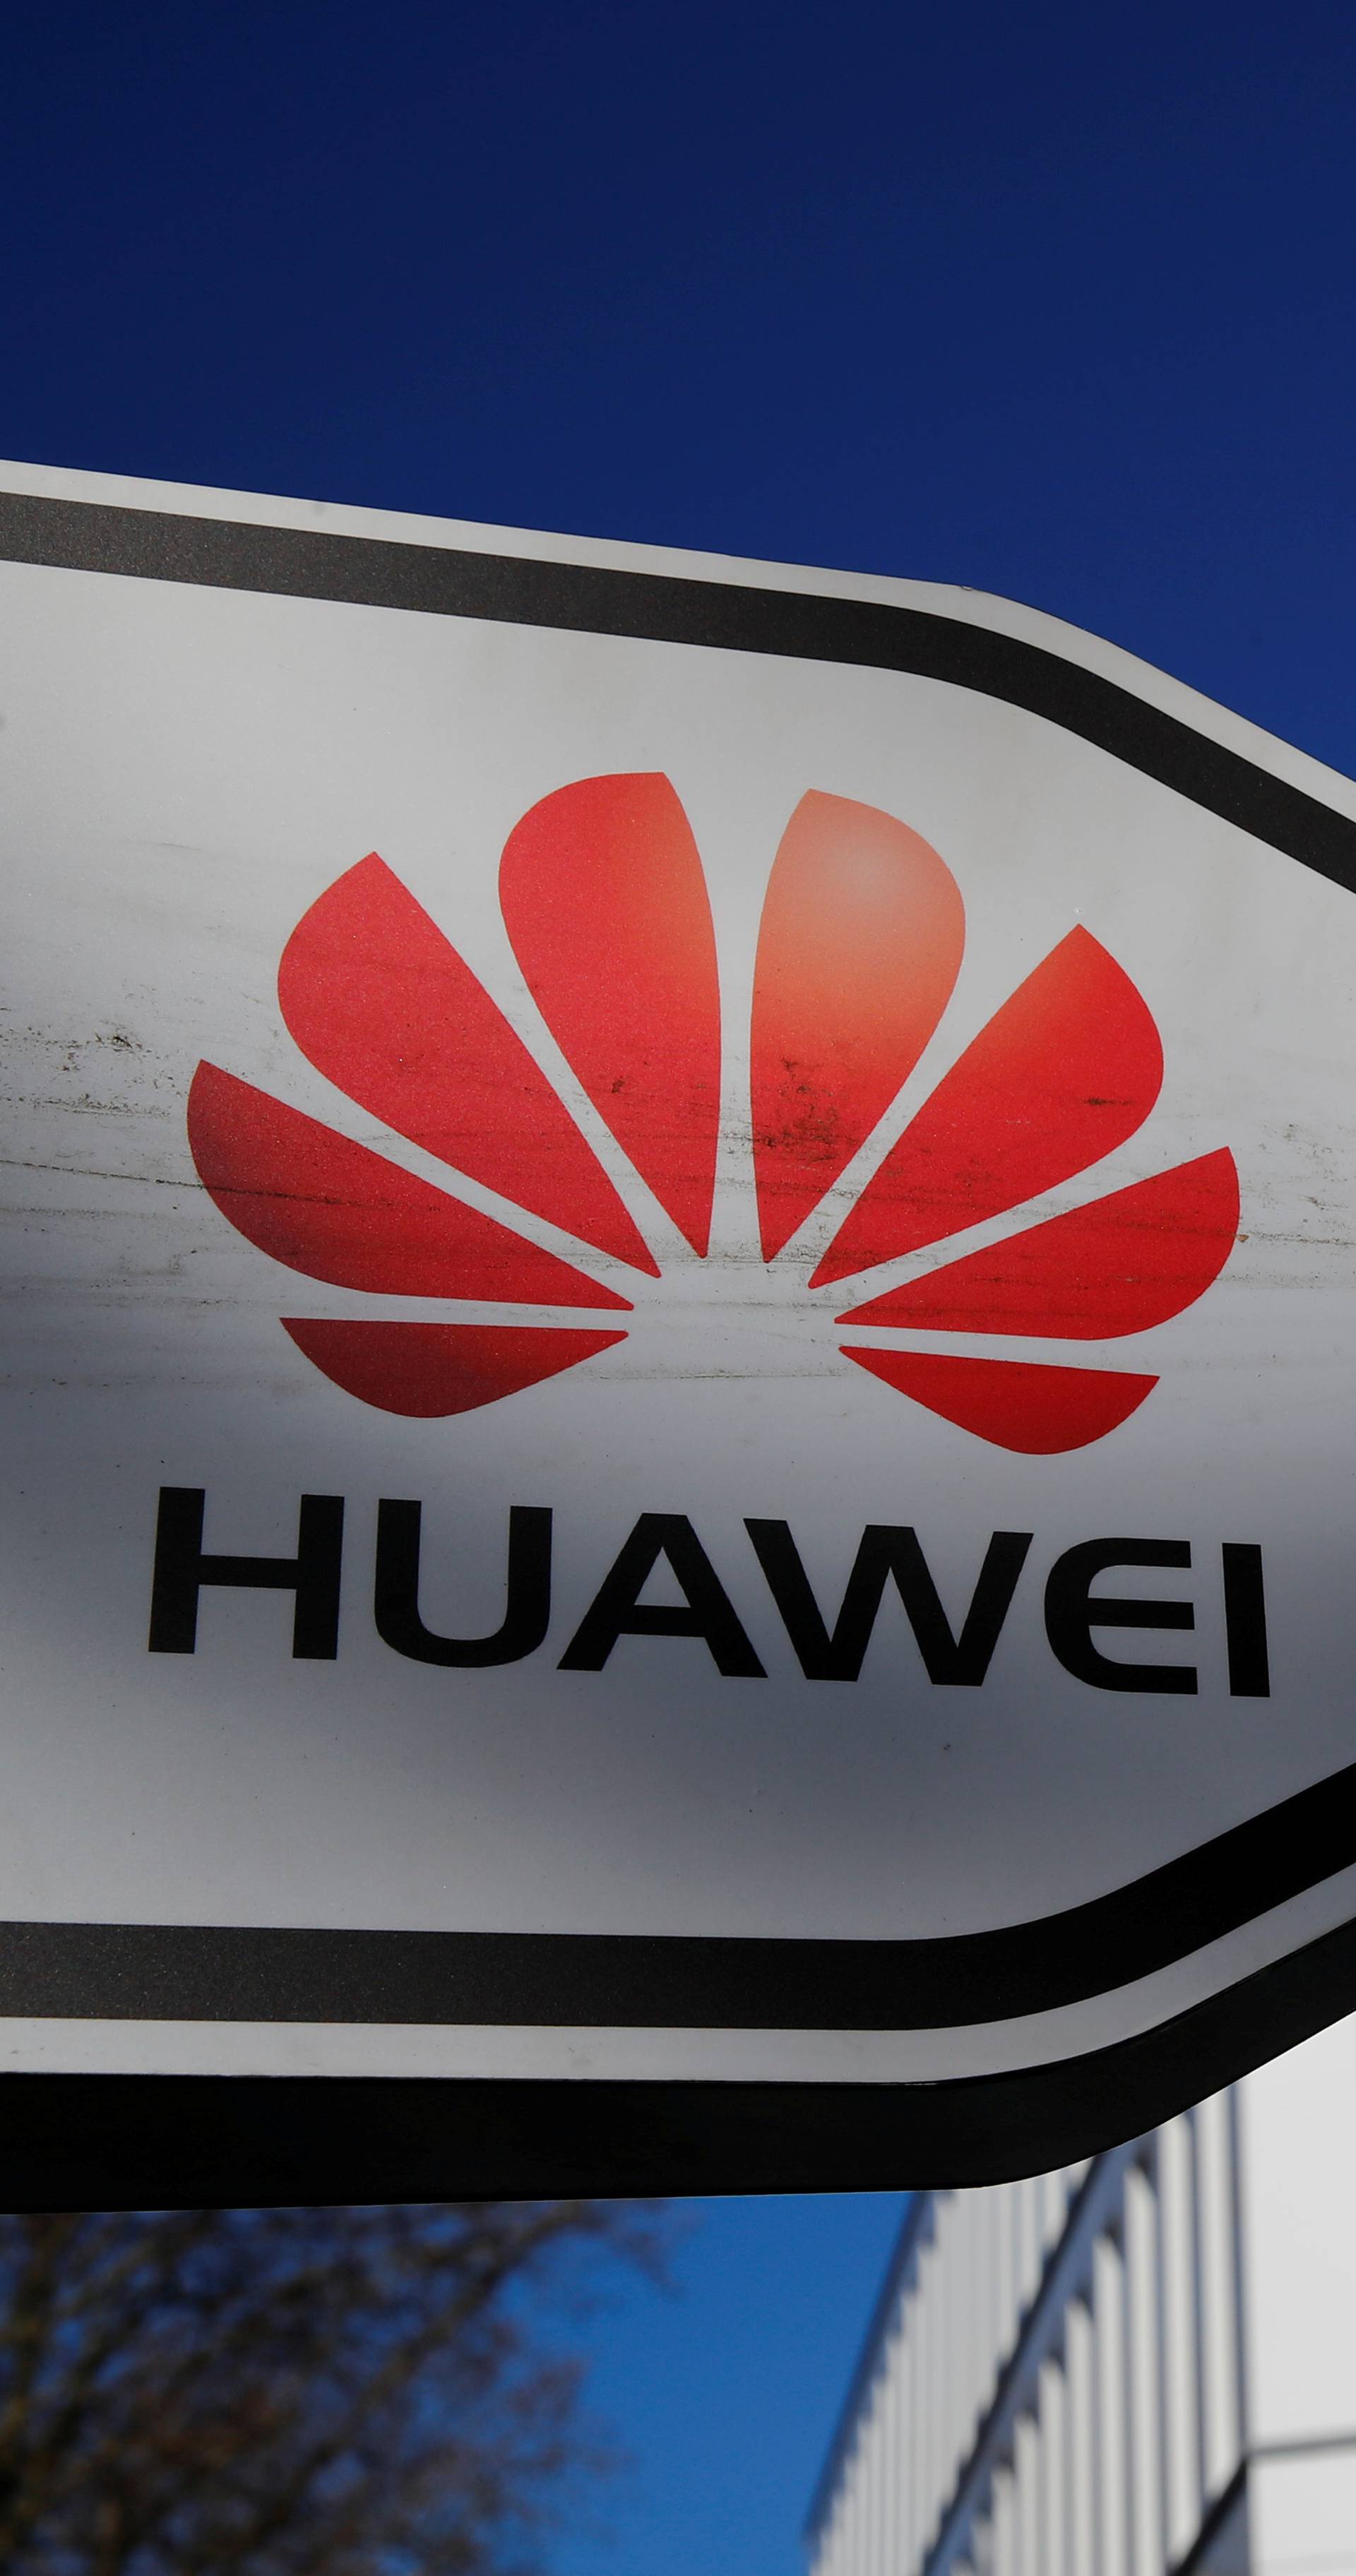 FILE PHOTO: The logo of Huawei Technologies is pictured in front of the German headquarters of the Chinese telecommunications giant in Duesseldorf